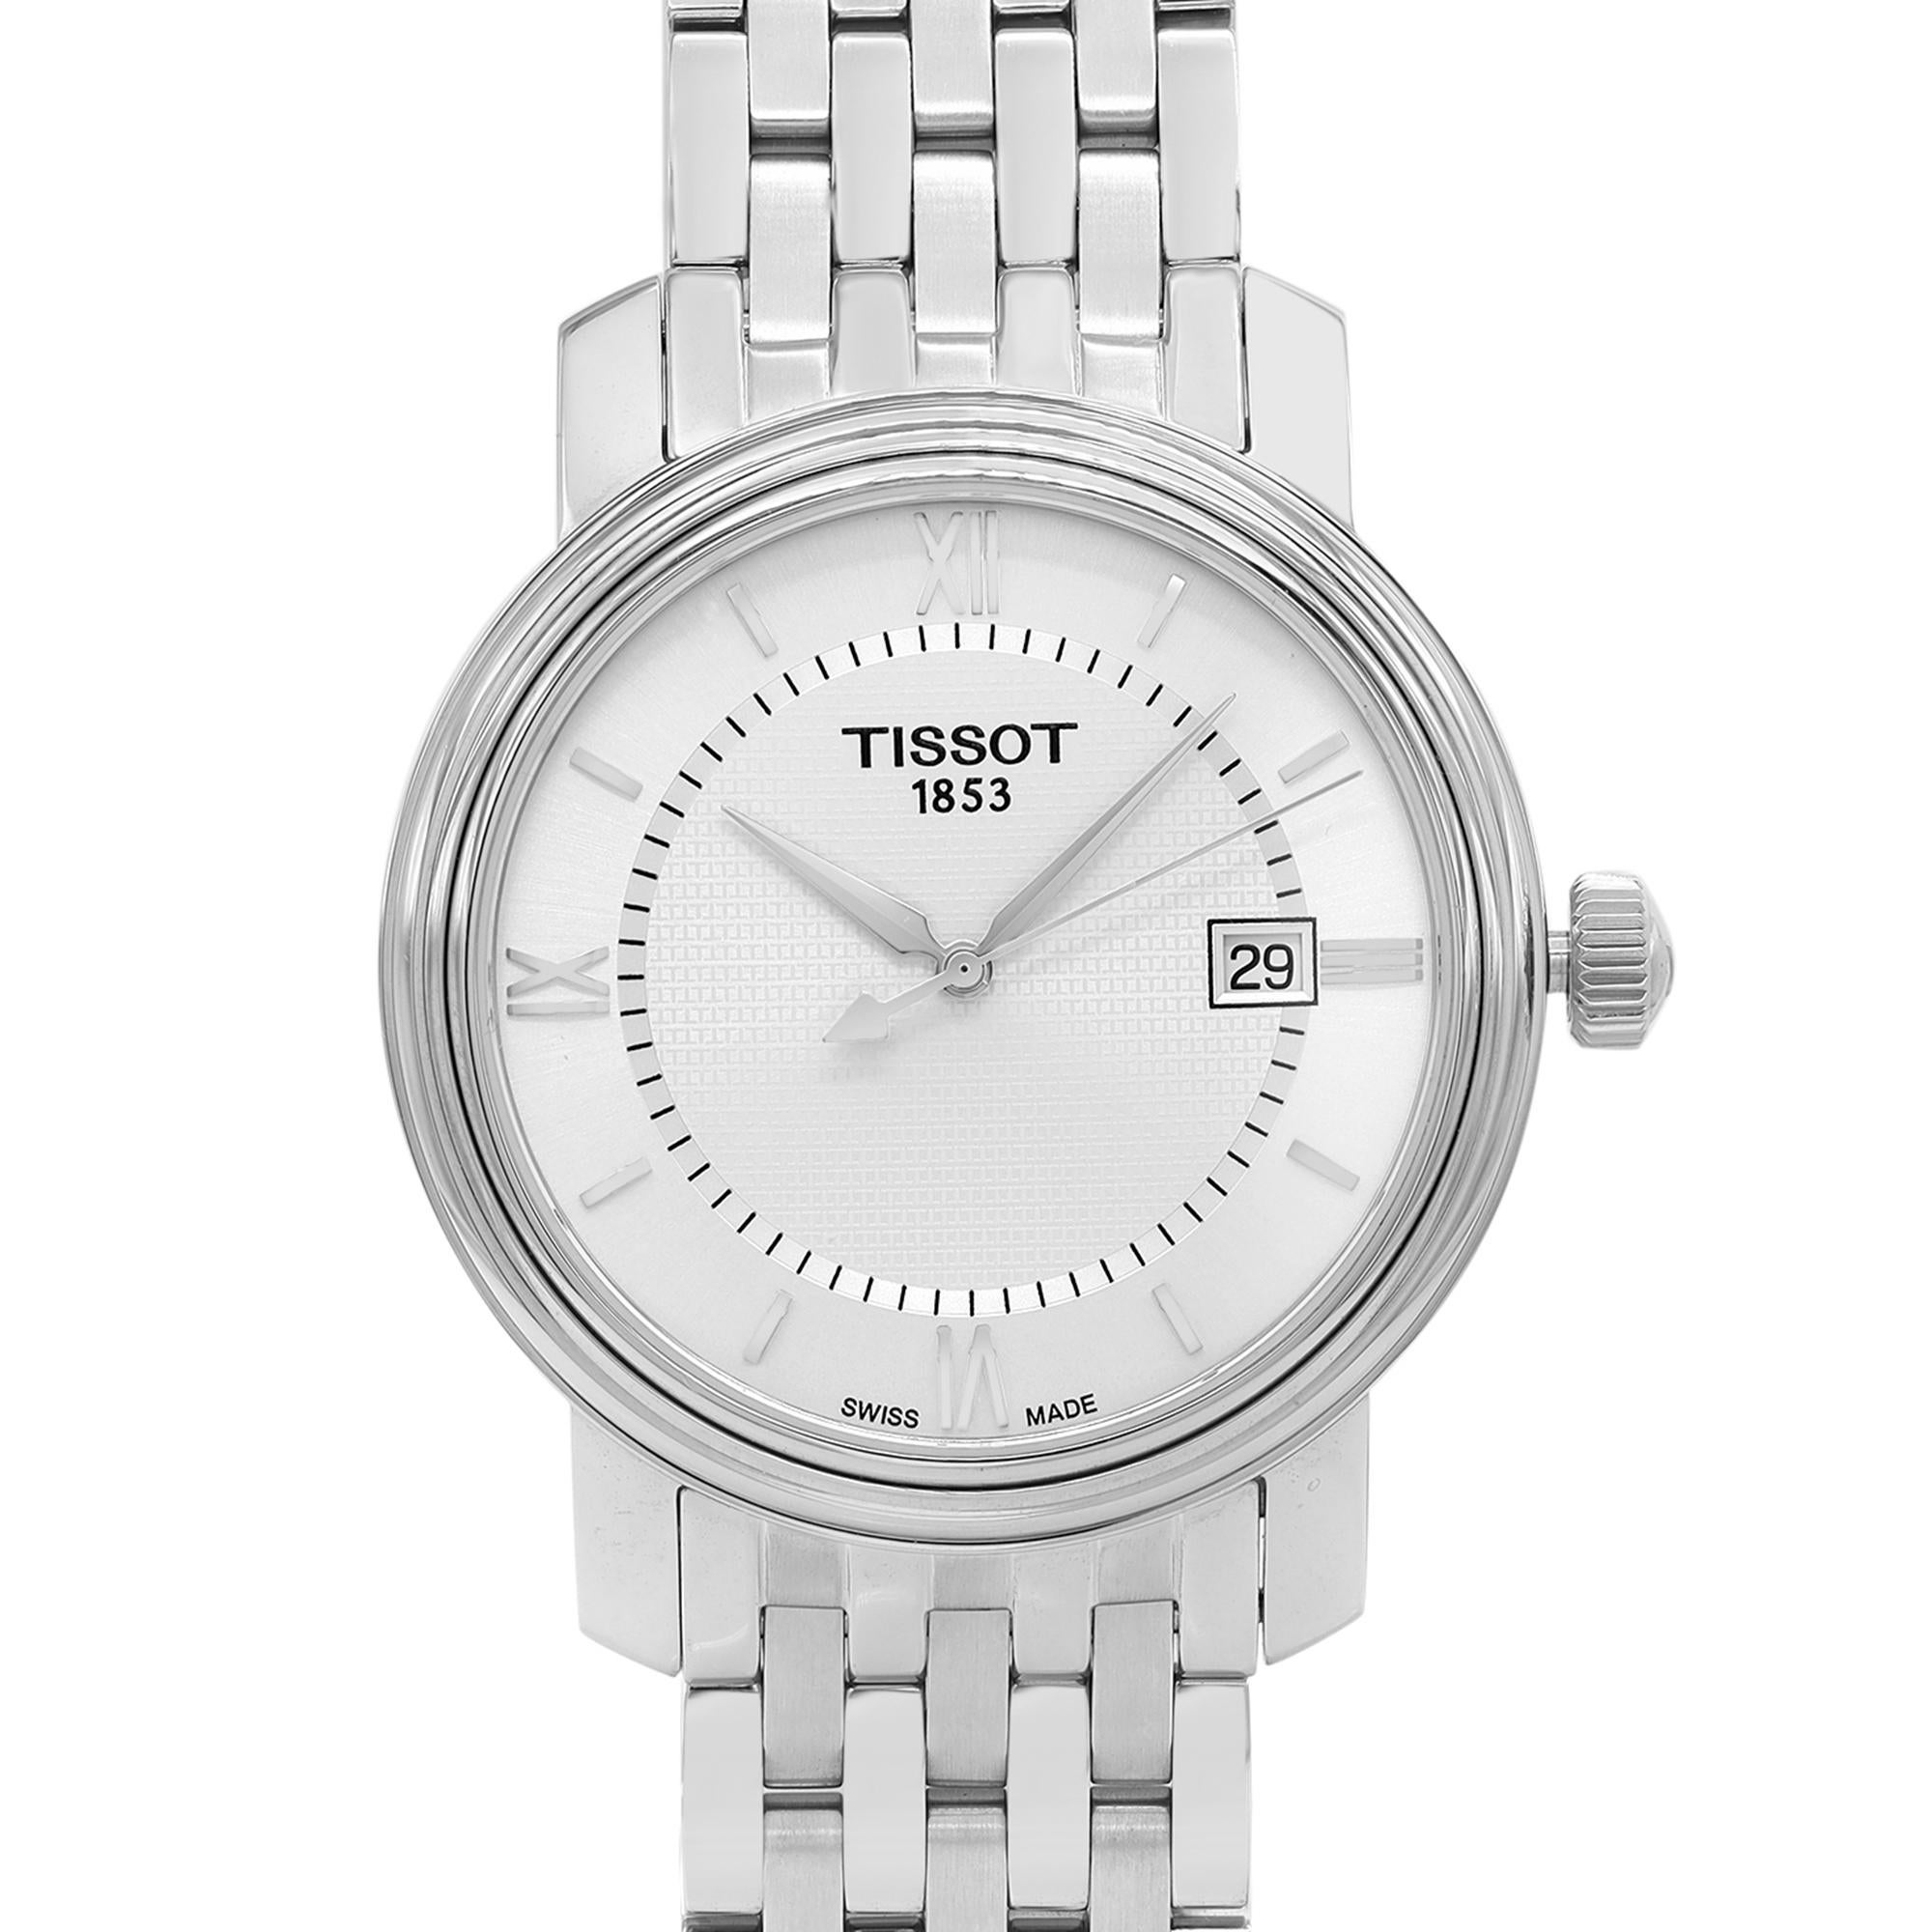 Display Model Tissot Bridgeport Stainless Steel Silver Dial Men's Quartz Watch T097.410.11.038.00. This Beautiful Timepiece Features: Stainless Steel Case with a Stainless Steel Bracelet. Fixed Steel Bezel. Silver Dial with Silver-Tone Hands, and